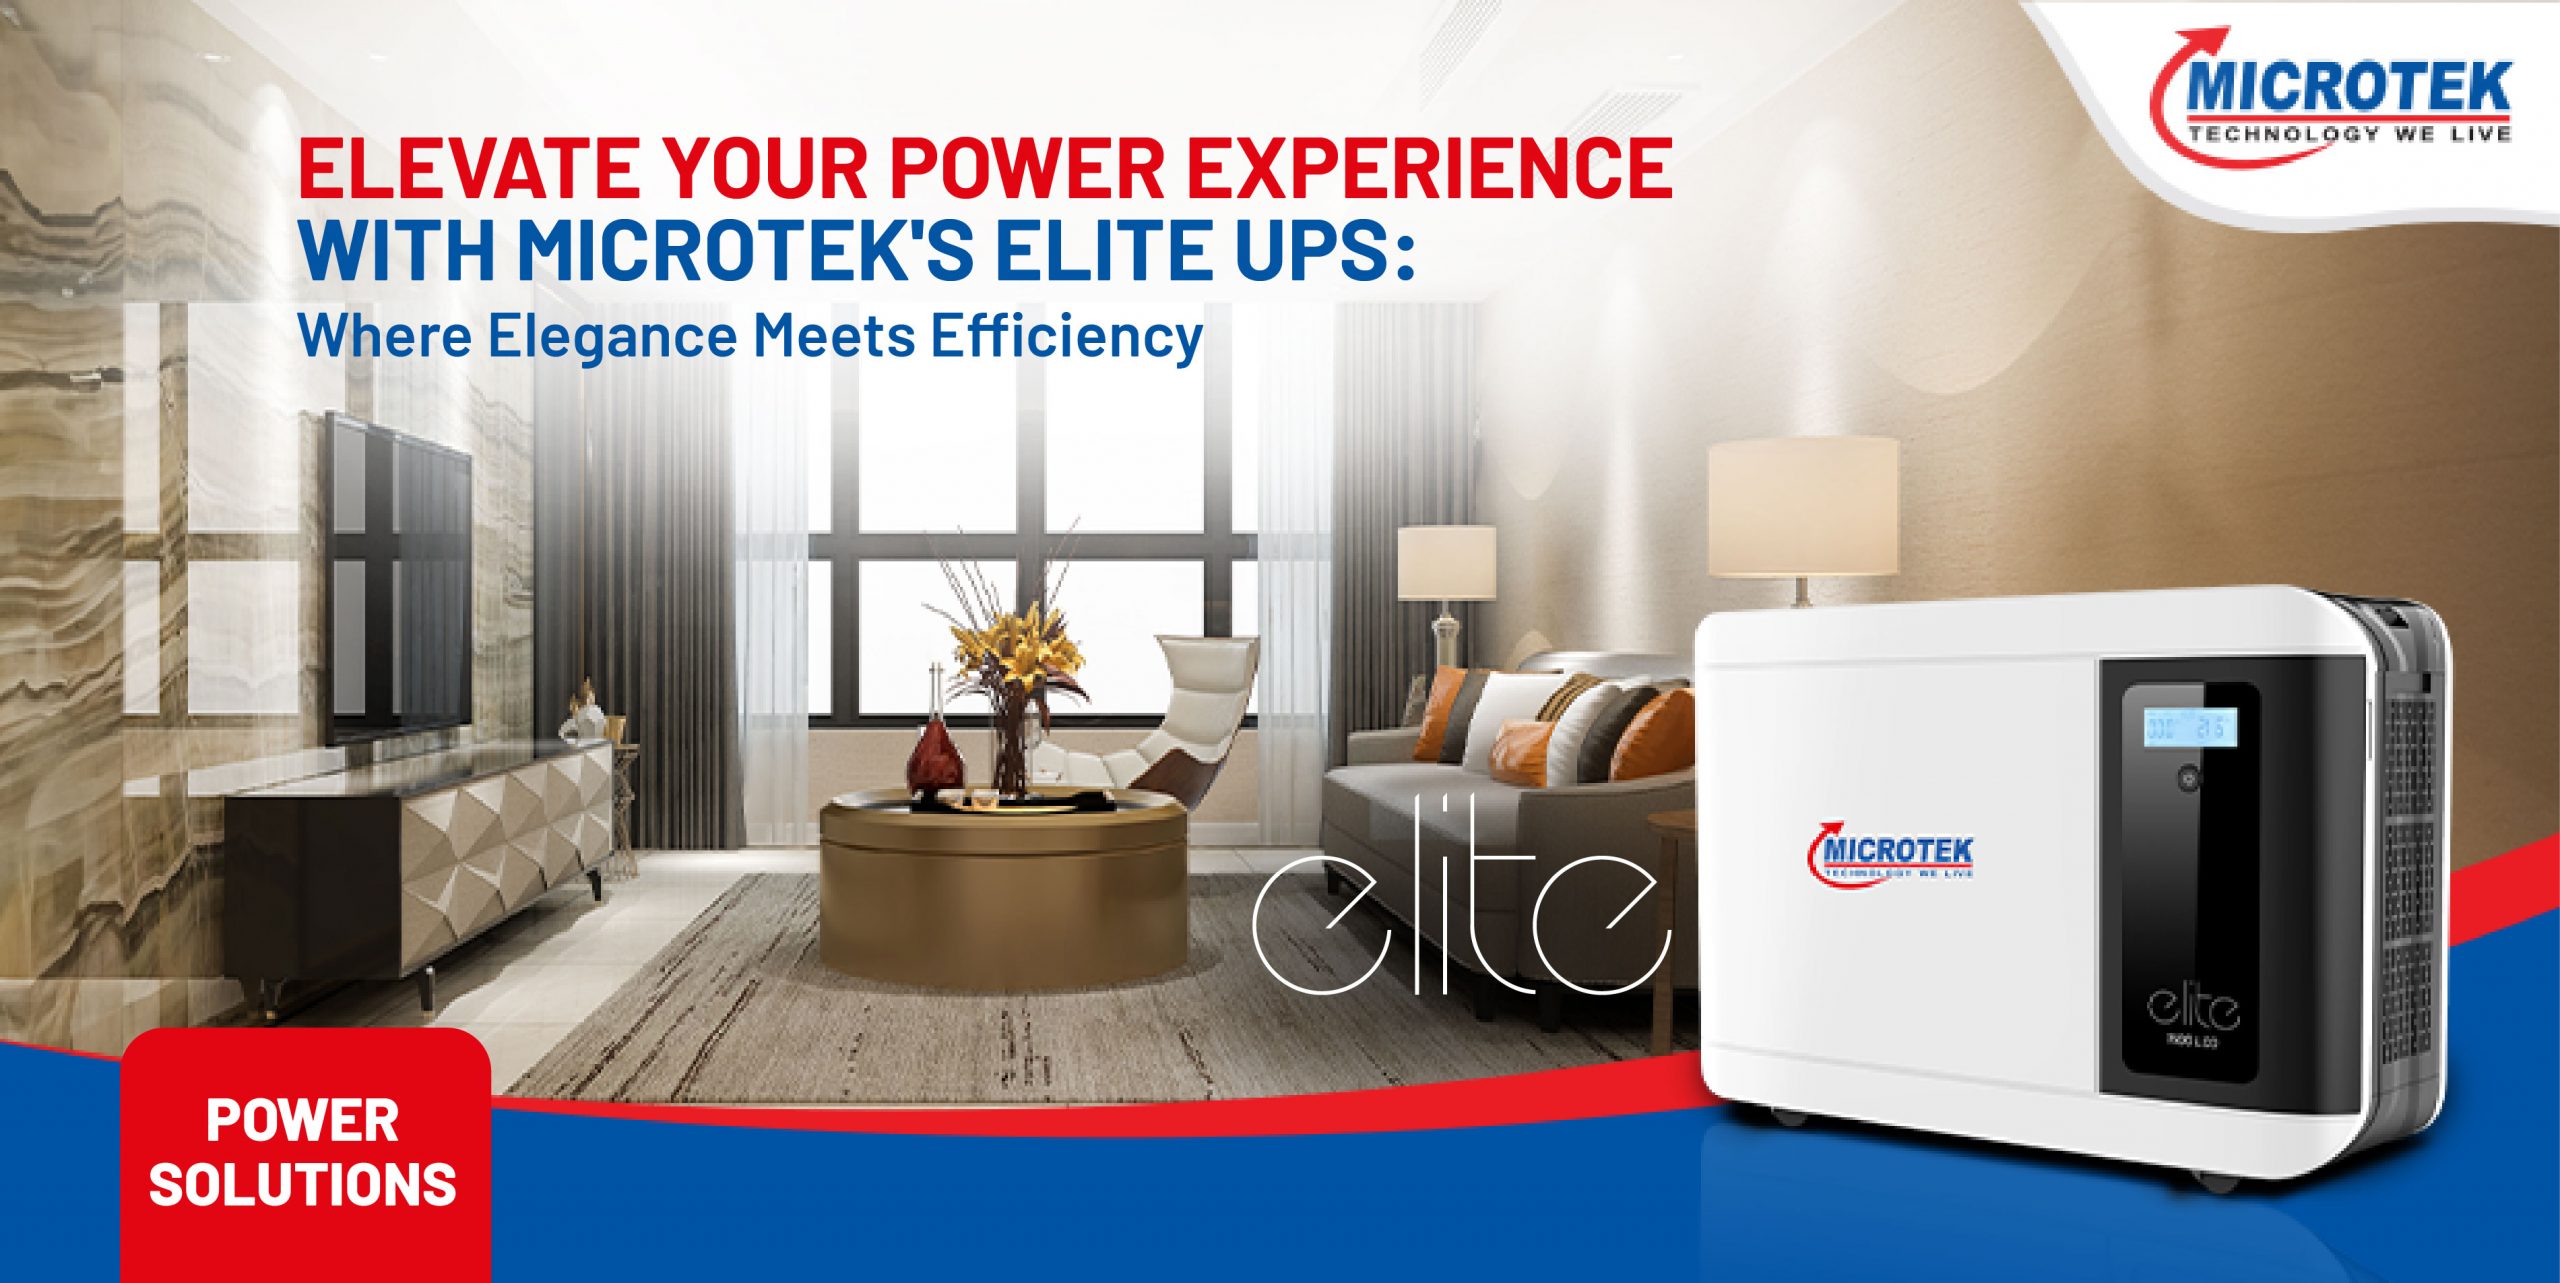 Elevate Your Power Experience with Microtek’s Elite UPS: Where Elegance Meets Efficiency